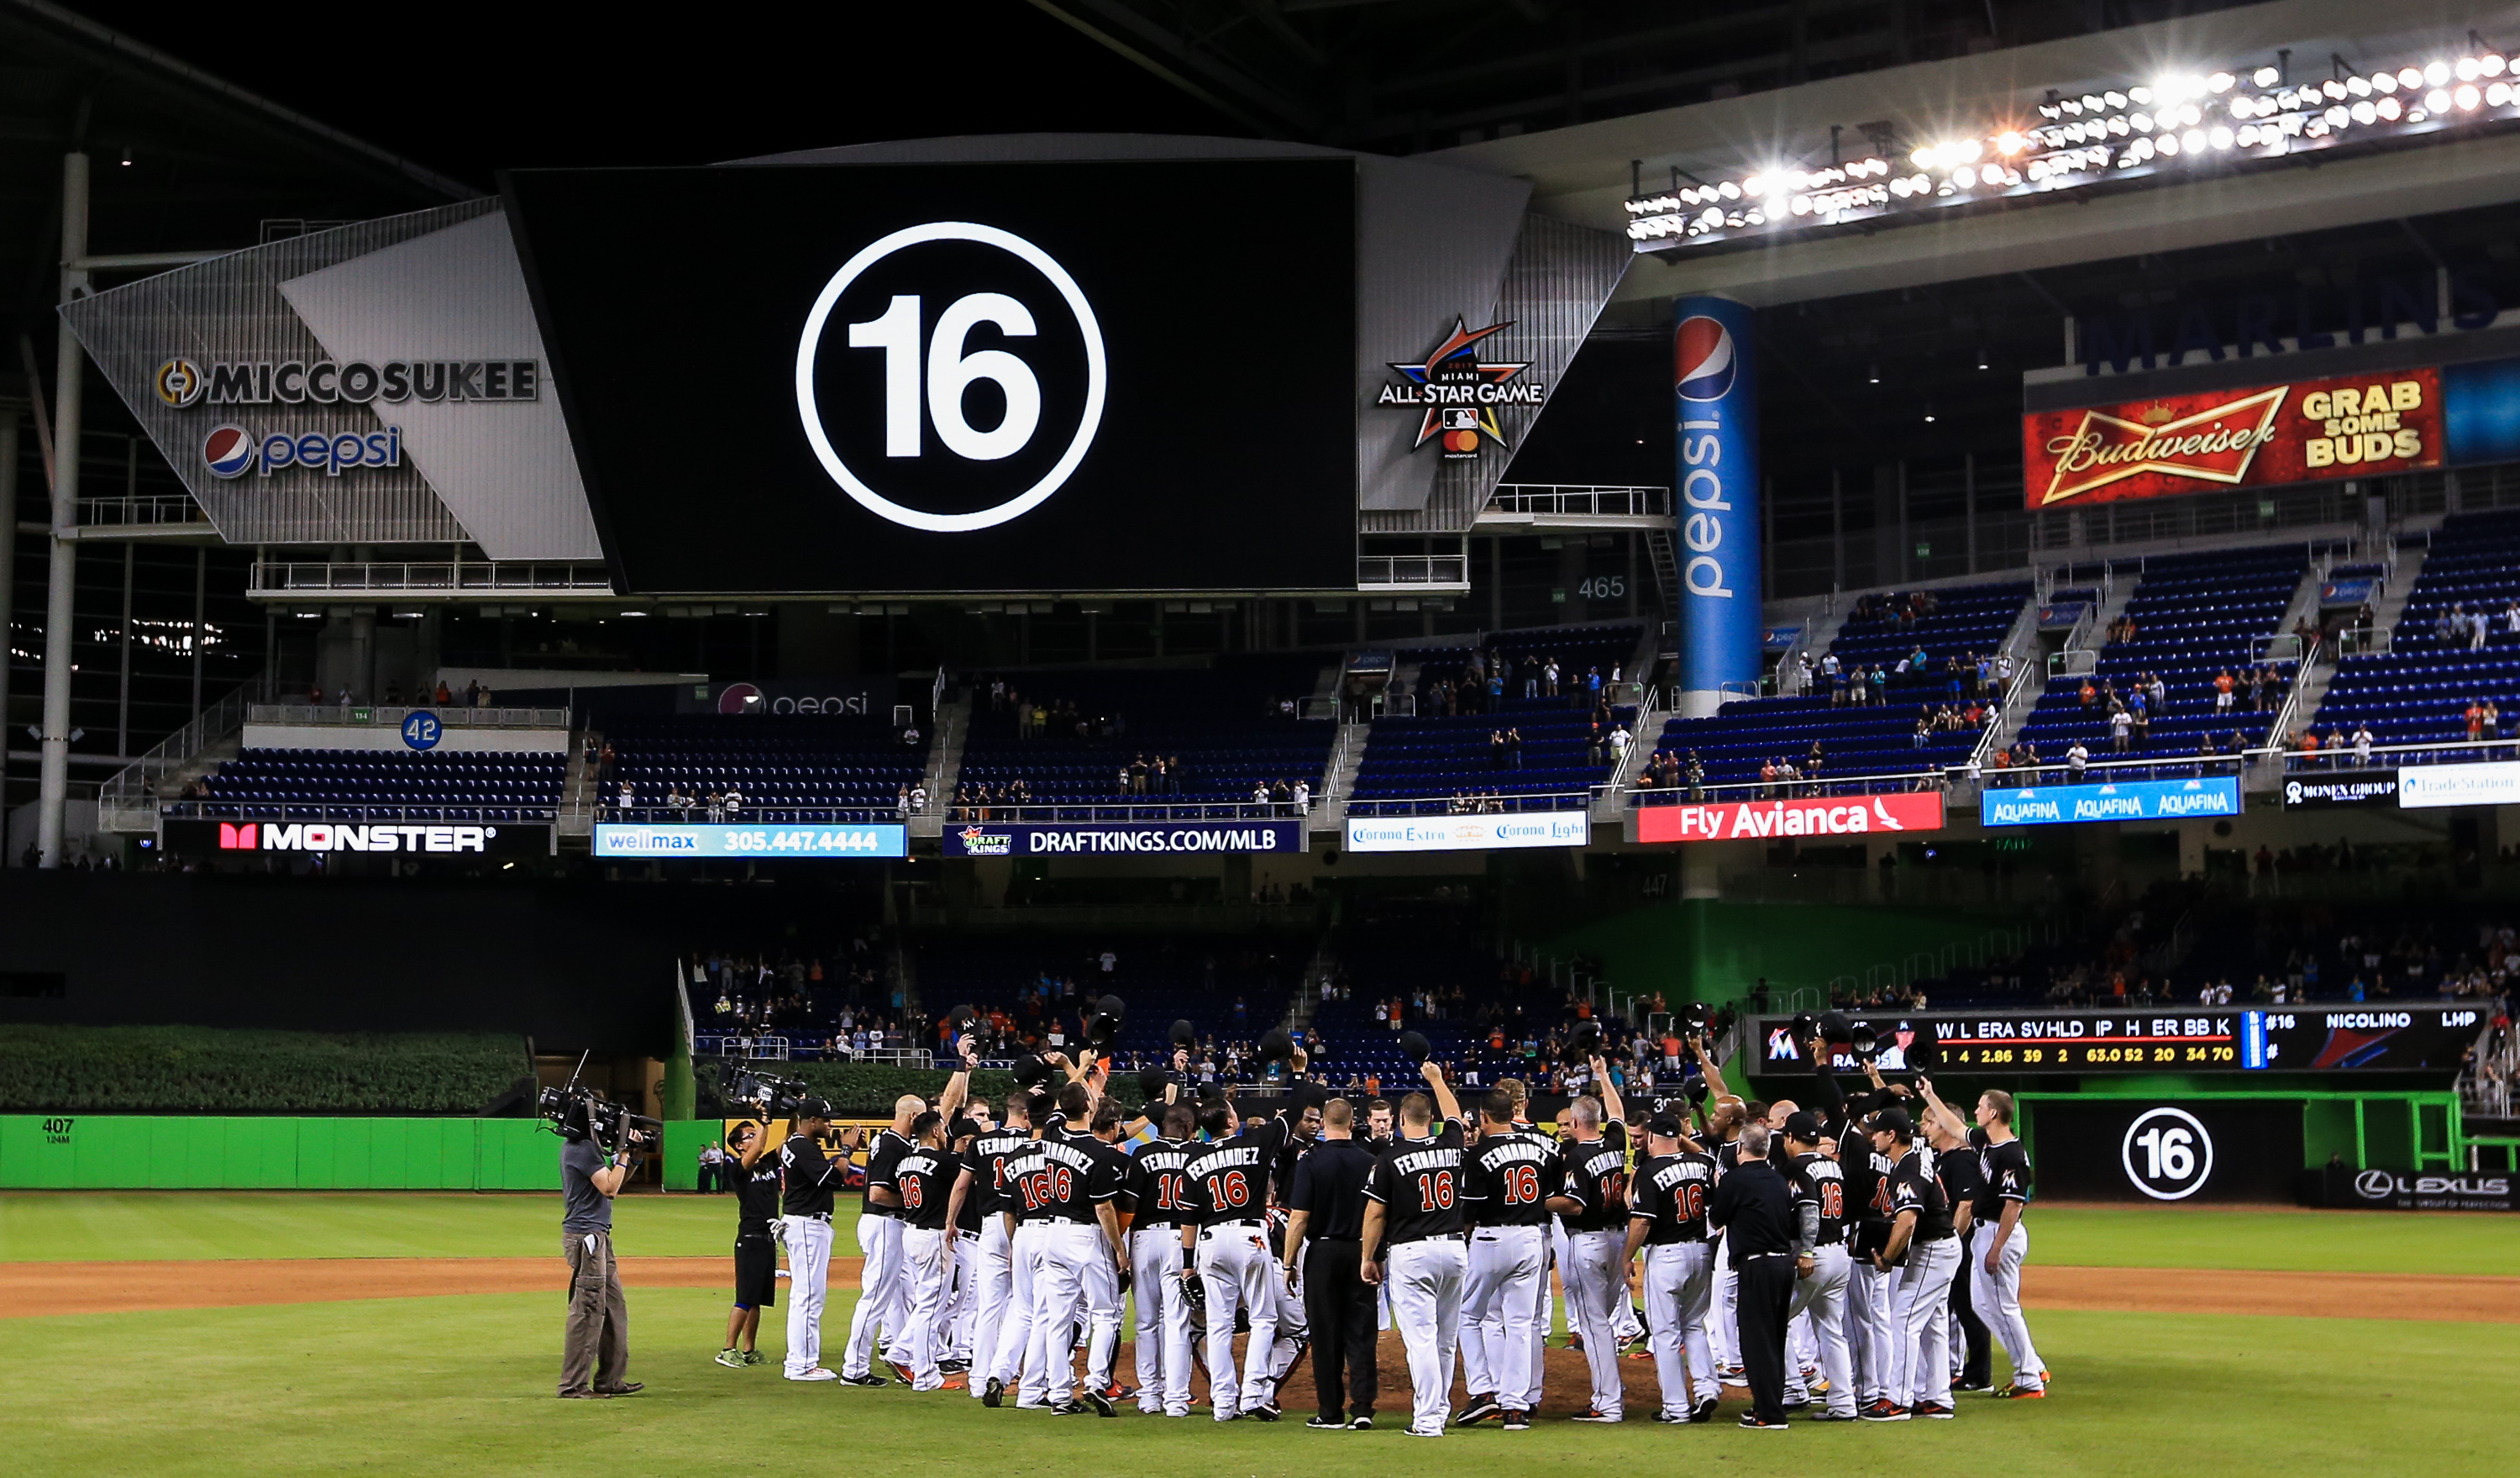 MIAMI, FL - SEPTEMBER 26: Miami Marlins players all wearing jerseys bearing the number 16 and name Fernandez honor the late Jose Fernandez after the game against the New York Mets at Marlins Park on September 26, 2016 in Miami, Florida. (Photo by Rob Foldy/Getty Images) ORG XMIT: 607685695 ORIG FILE ID: 610610532